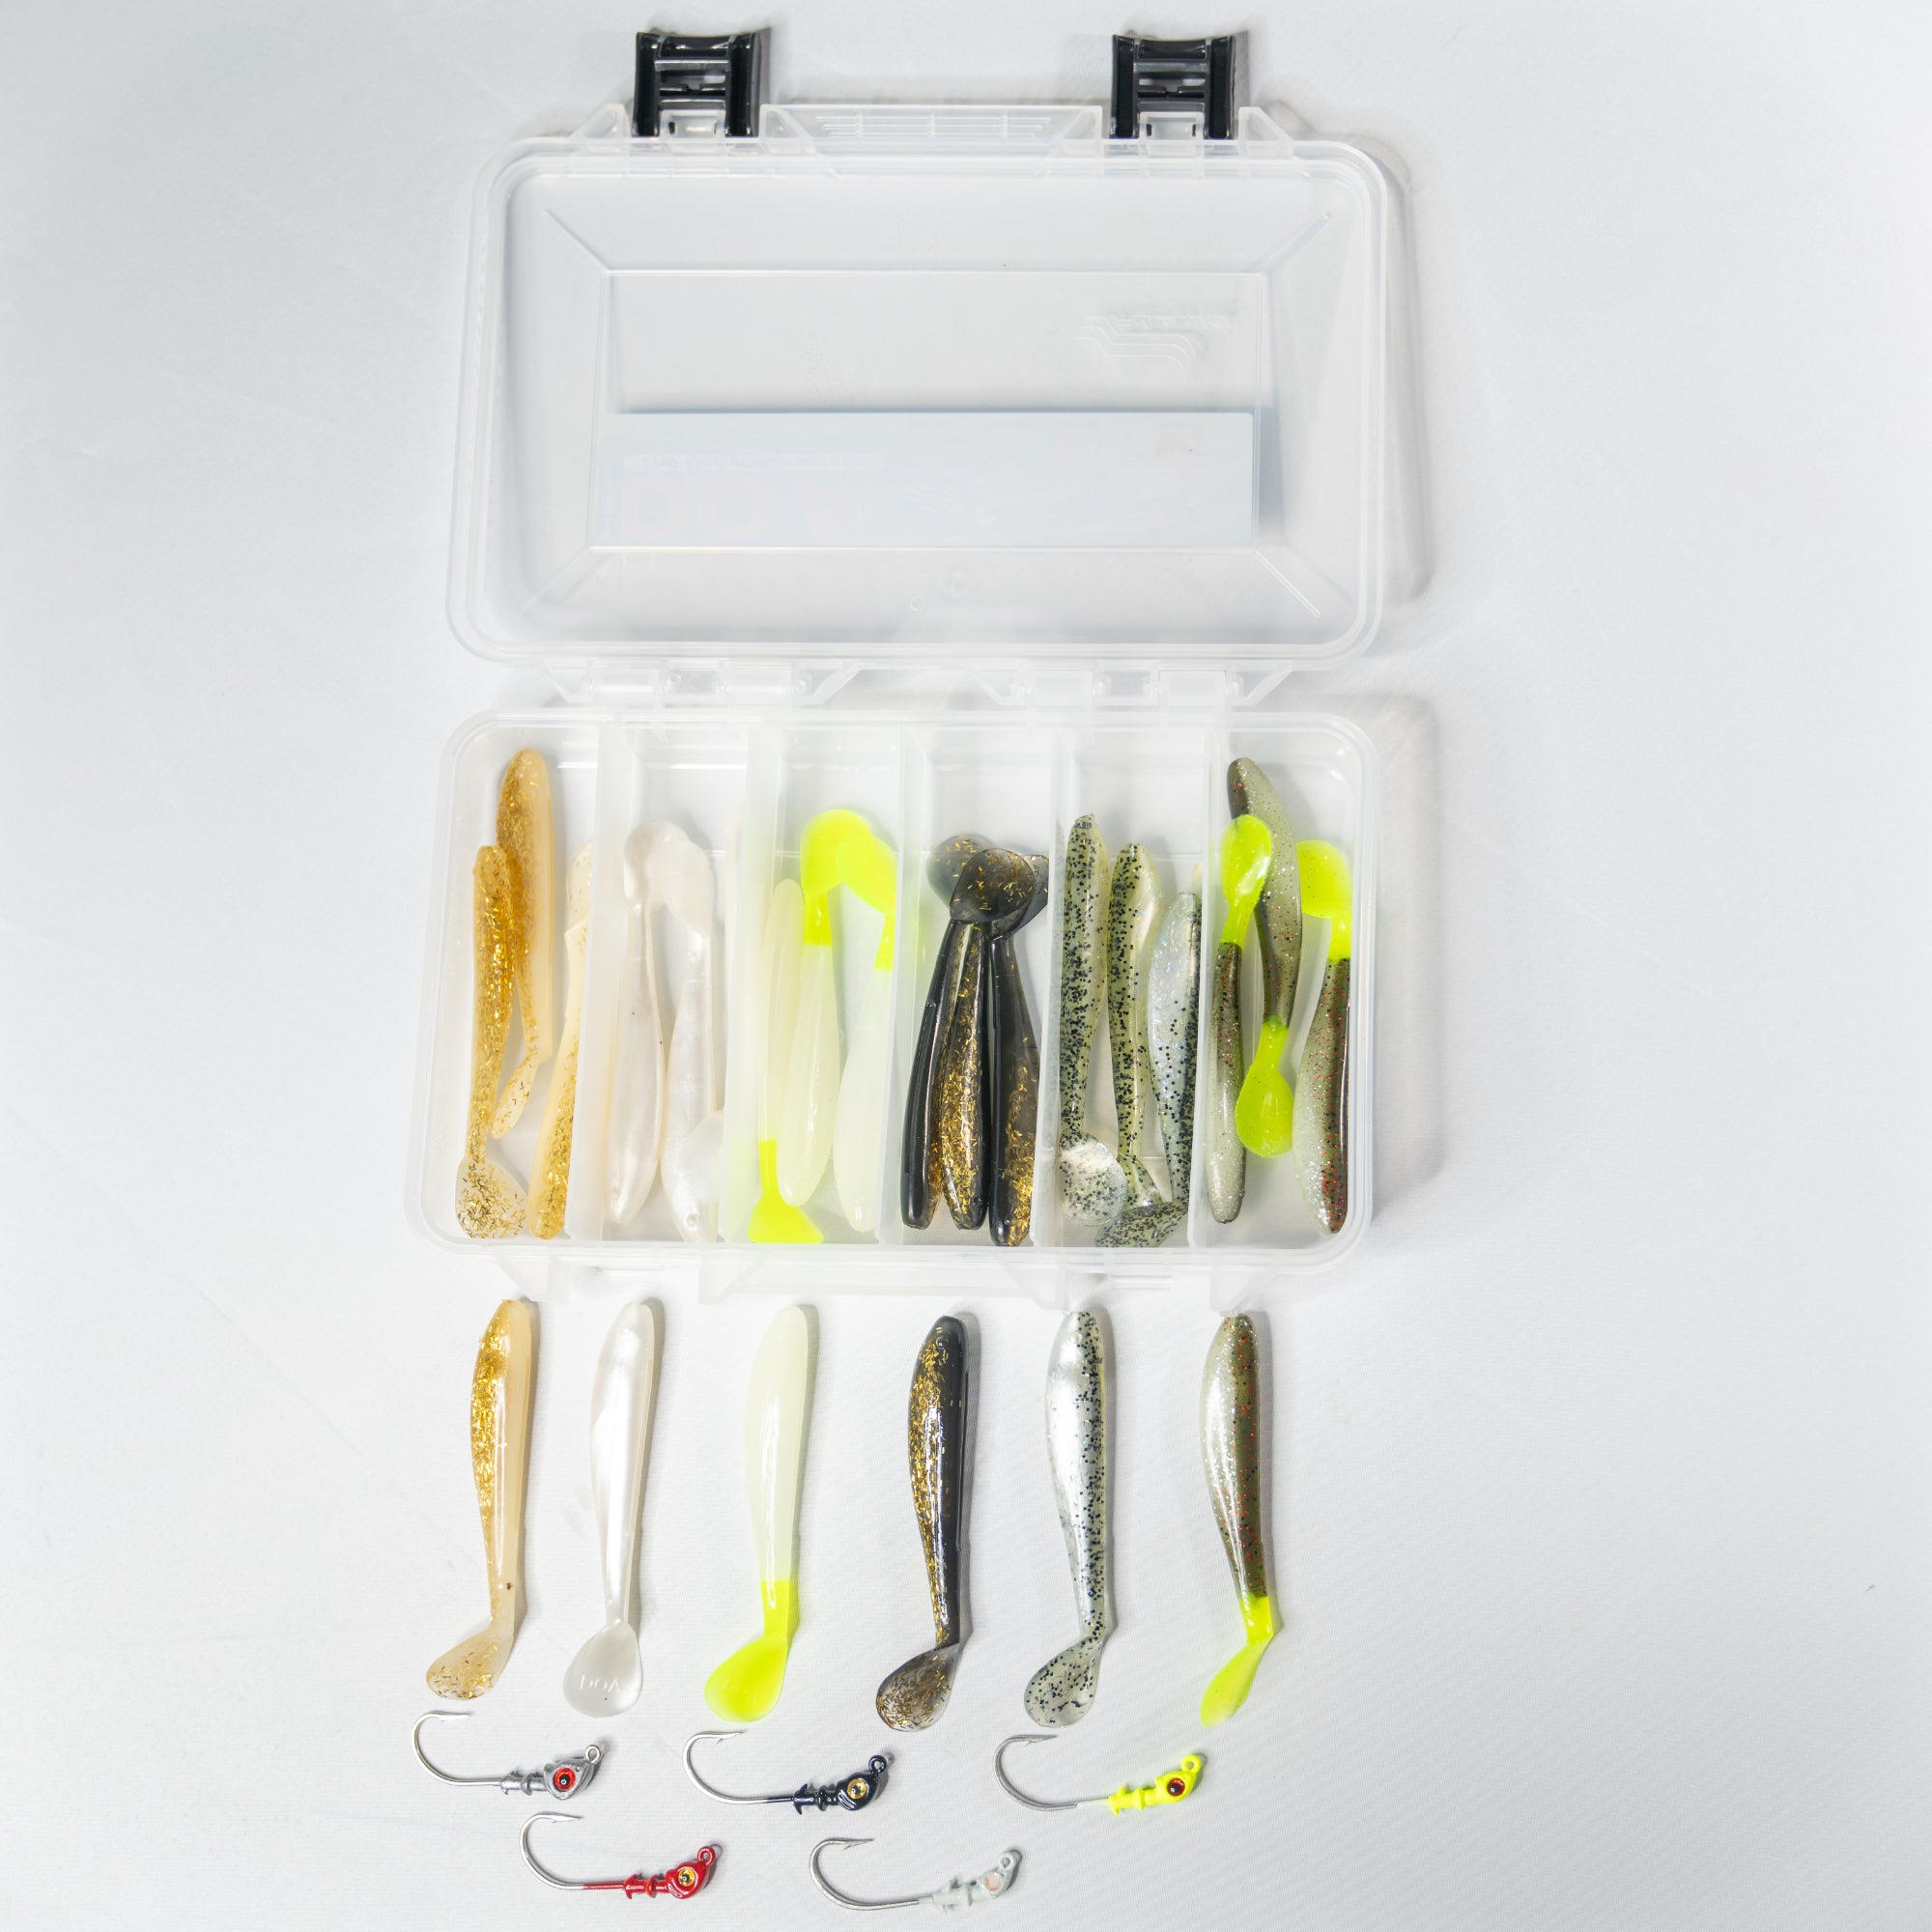 Small Plastic Fishing Tackle Box With Gear Fish Hooks Weights More